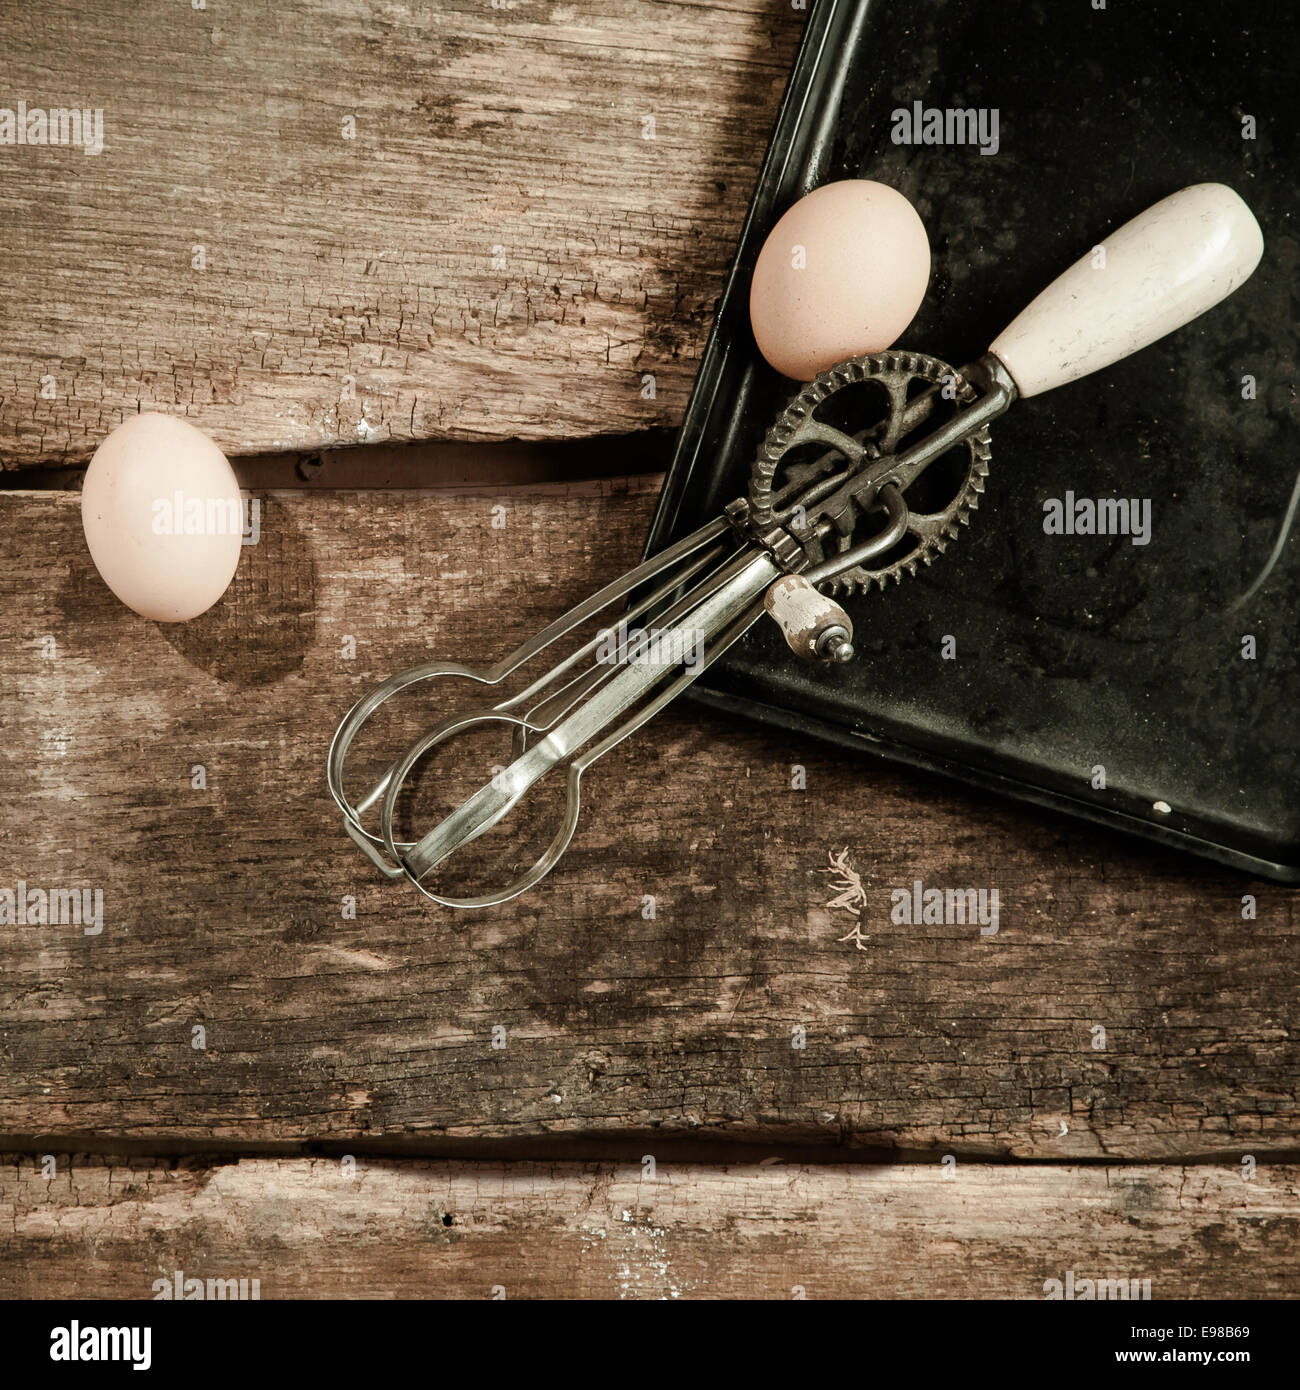 https://c8.alamy.com/comp/E98B69/high-angle-view-of-two-eggs-and-an-old-egg-beater-resting-on-a-baking-E98B69.jpg